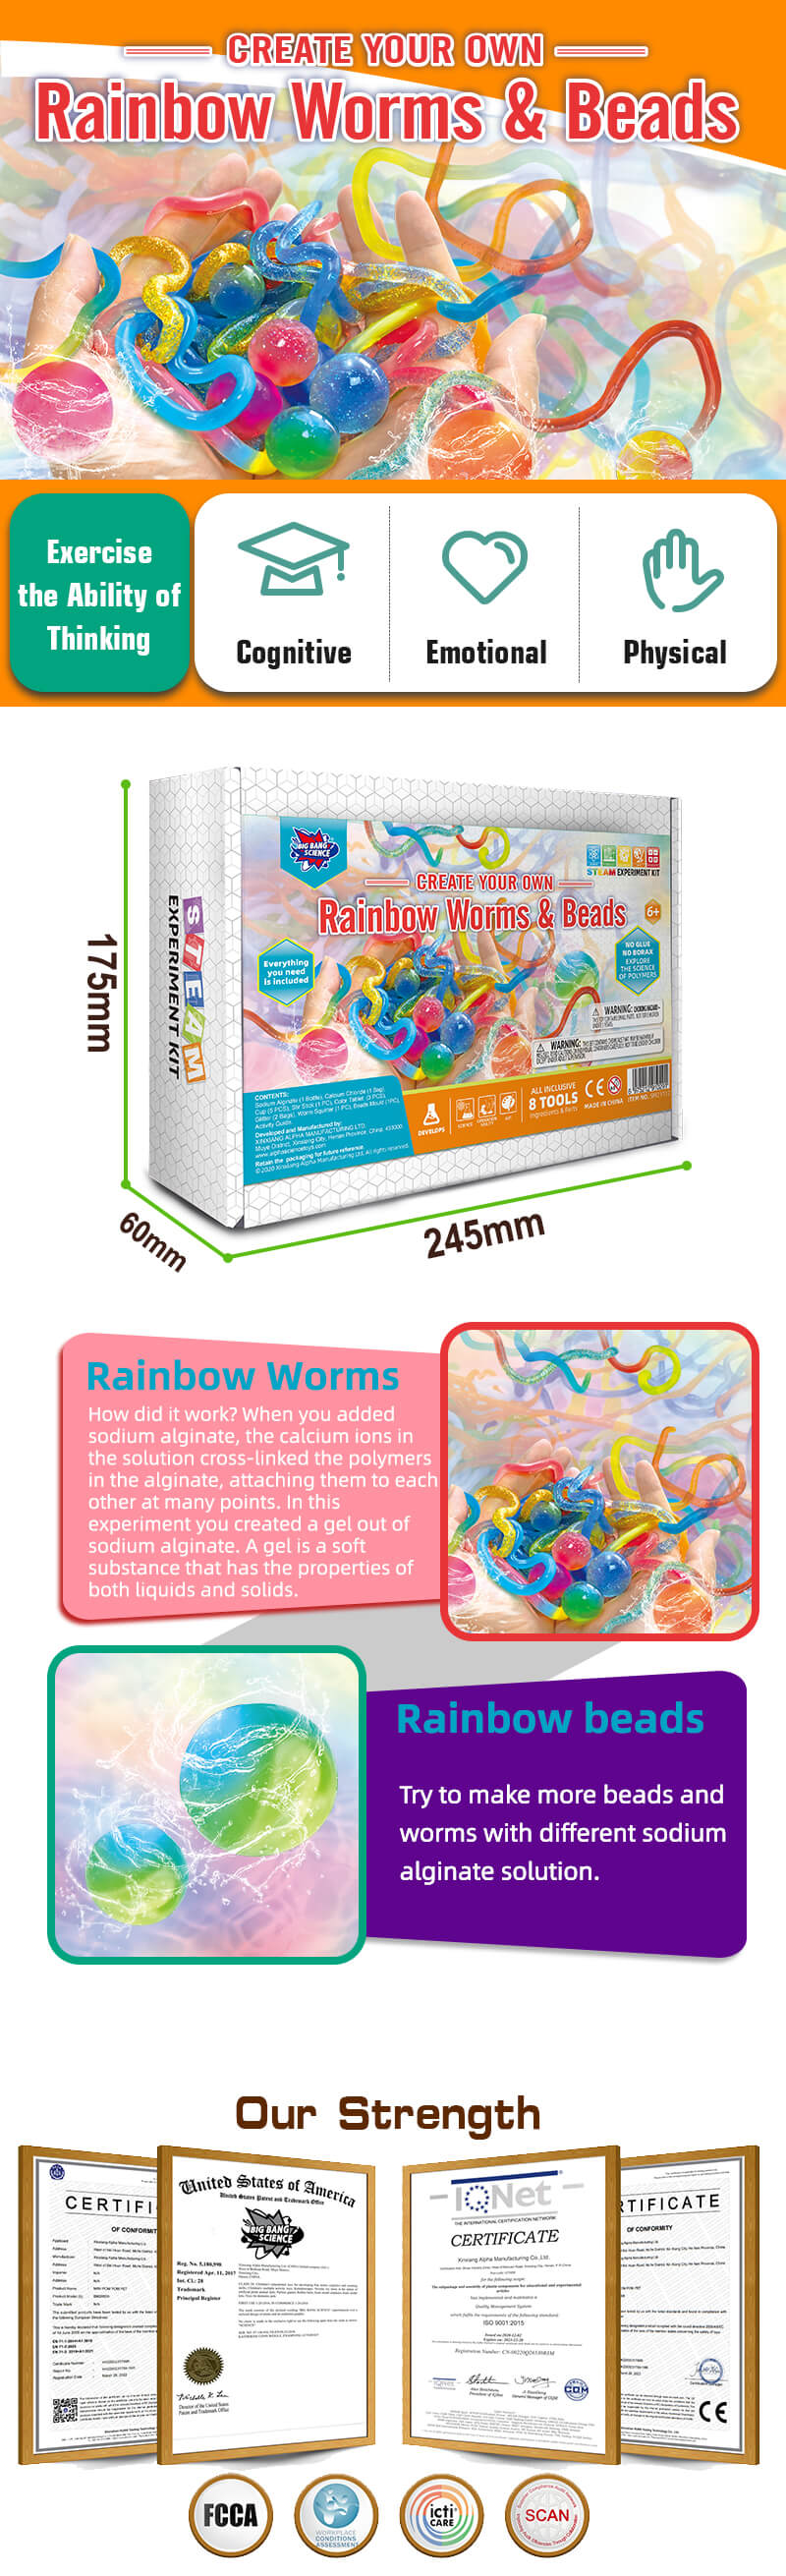 Rainbow-Worms-&-Beads-Product-details-chart